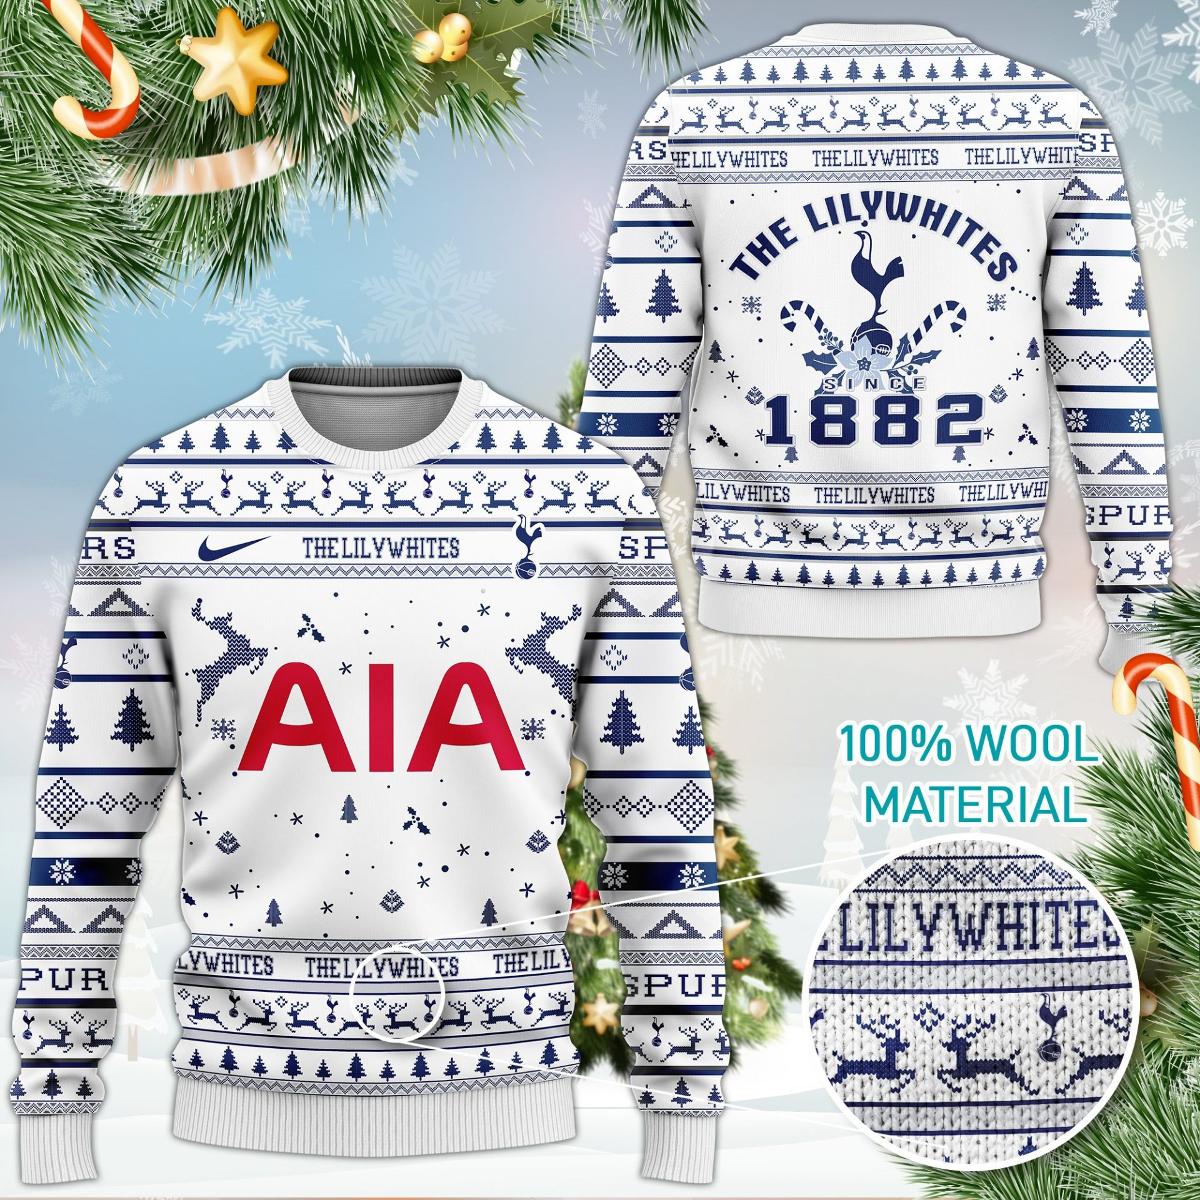 Everton Fc Gnome Best Funny Christmas Sweater